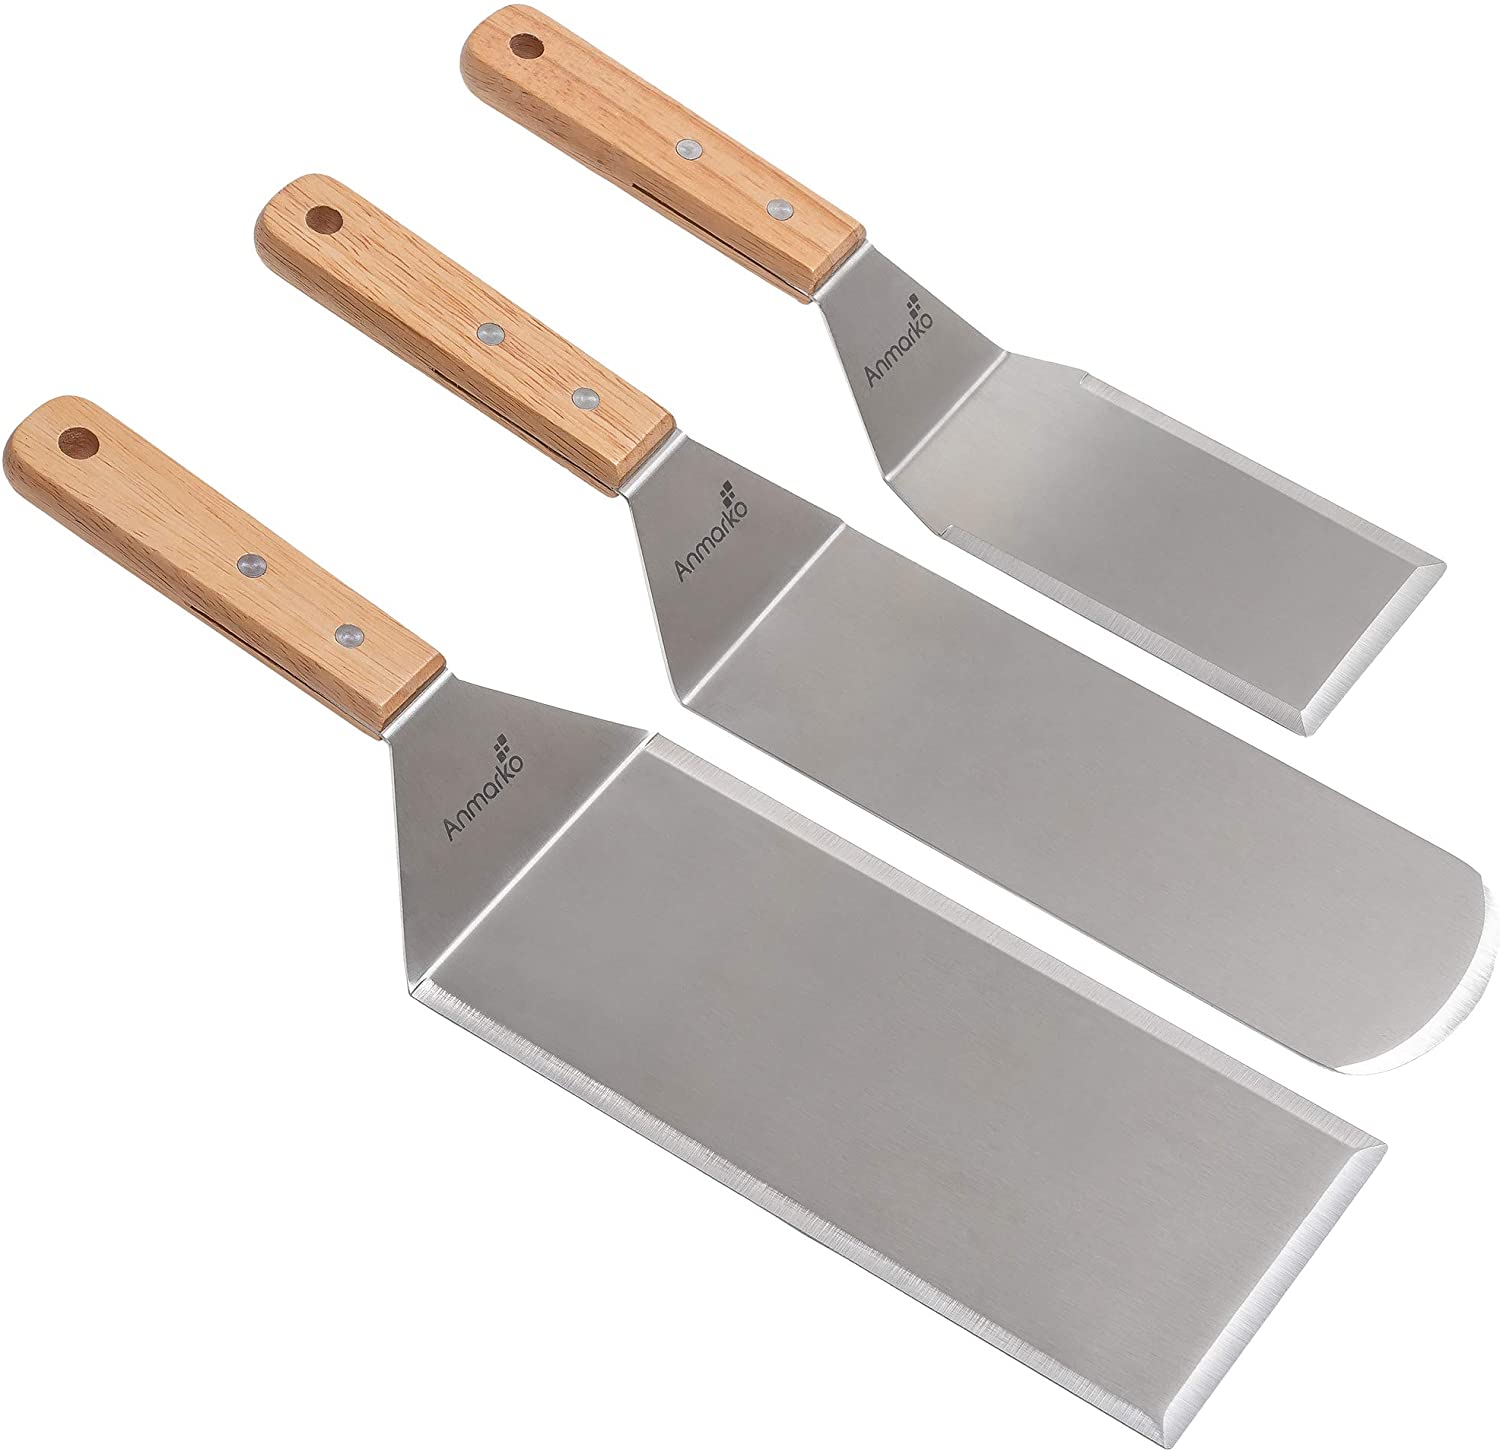 Stainless Steel Spatula Set for Cast Iron Pans will rock your world